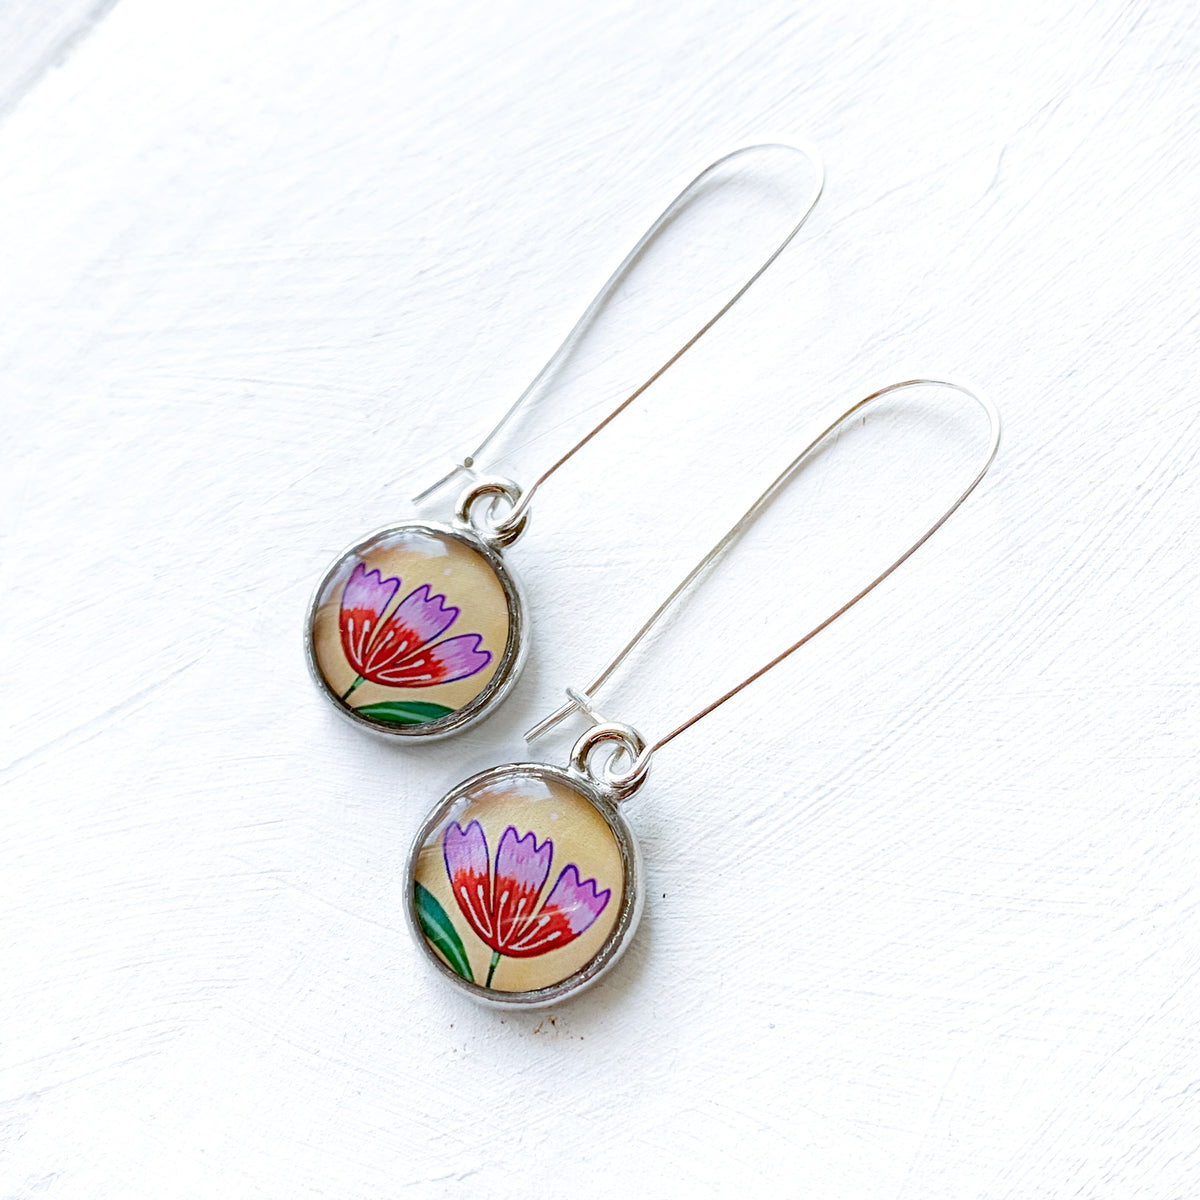 a pair of earrings with flowers painted on them